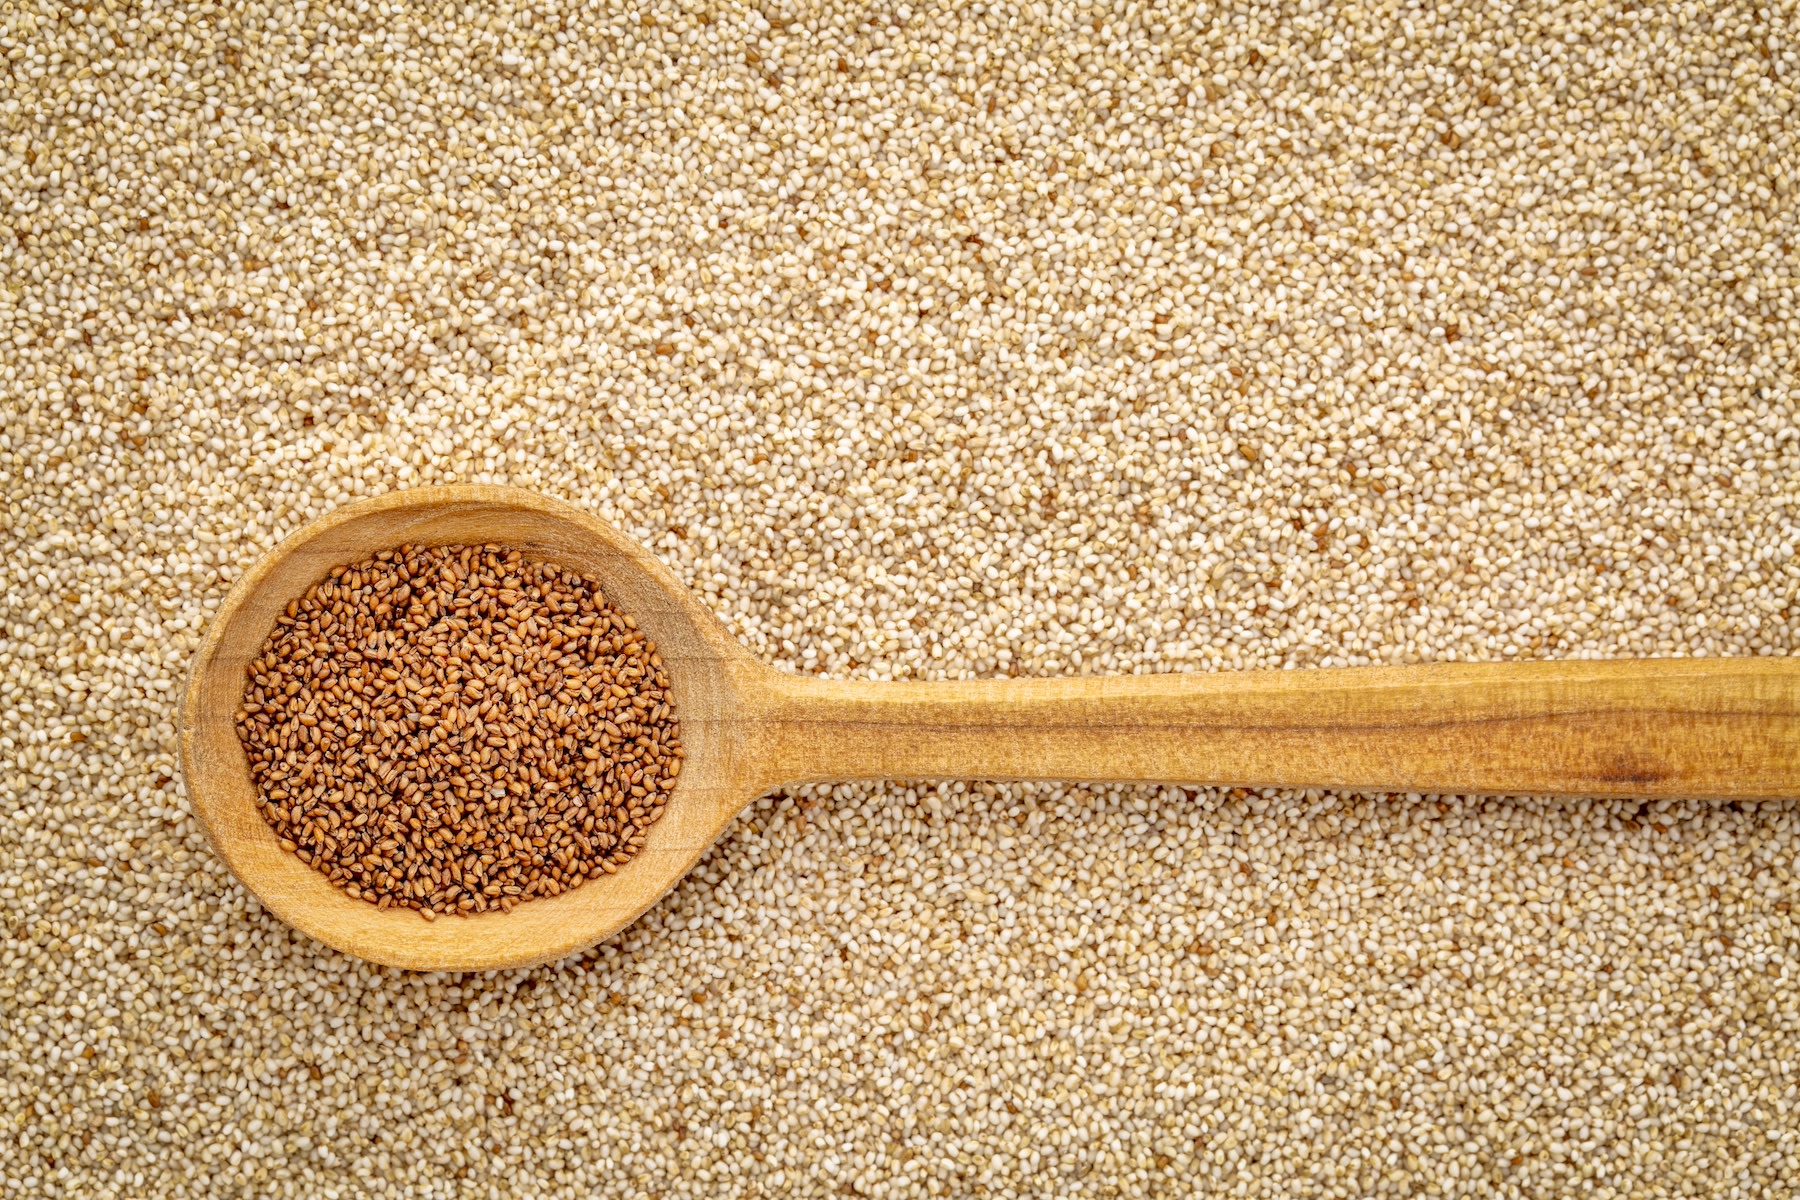 Teff grain in a spoon resting on a pile of more teff.